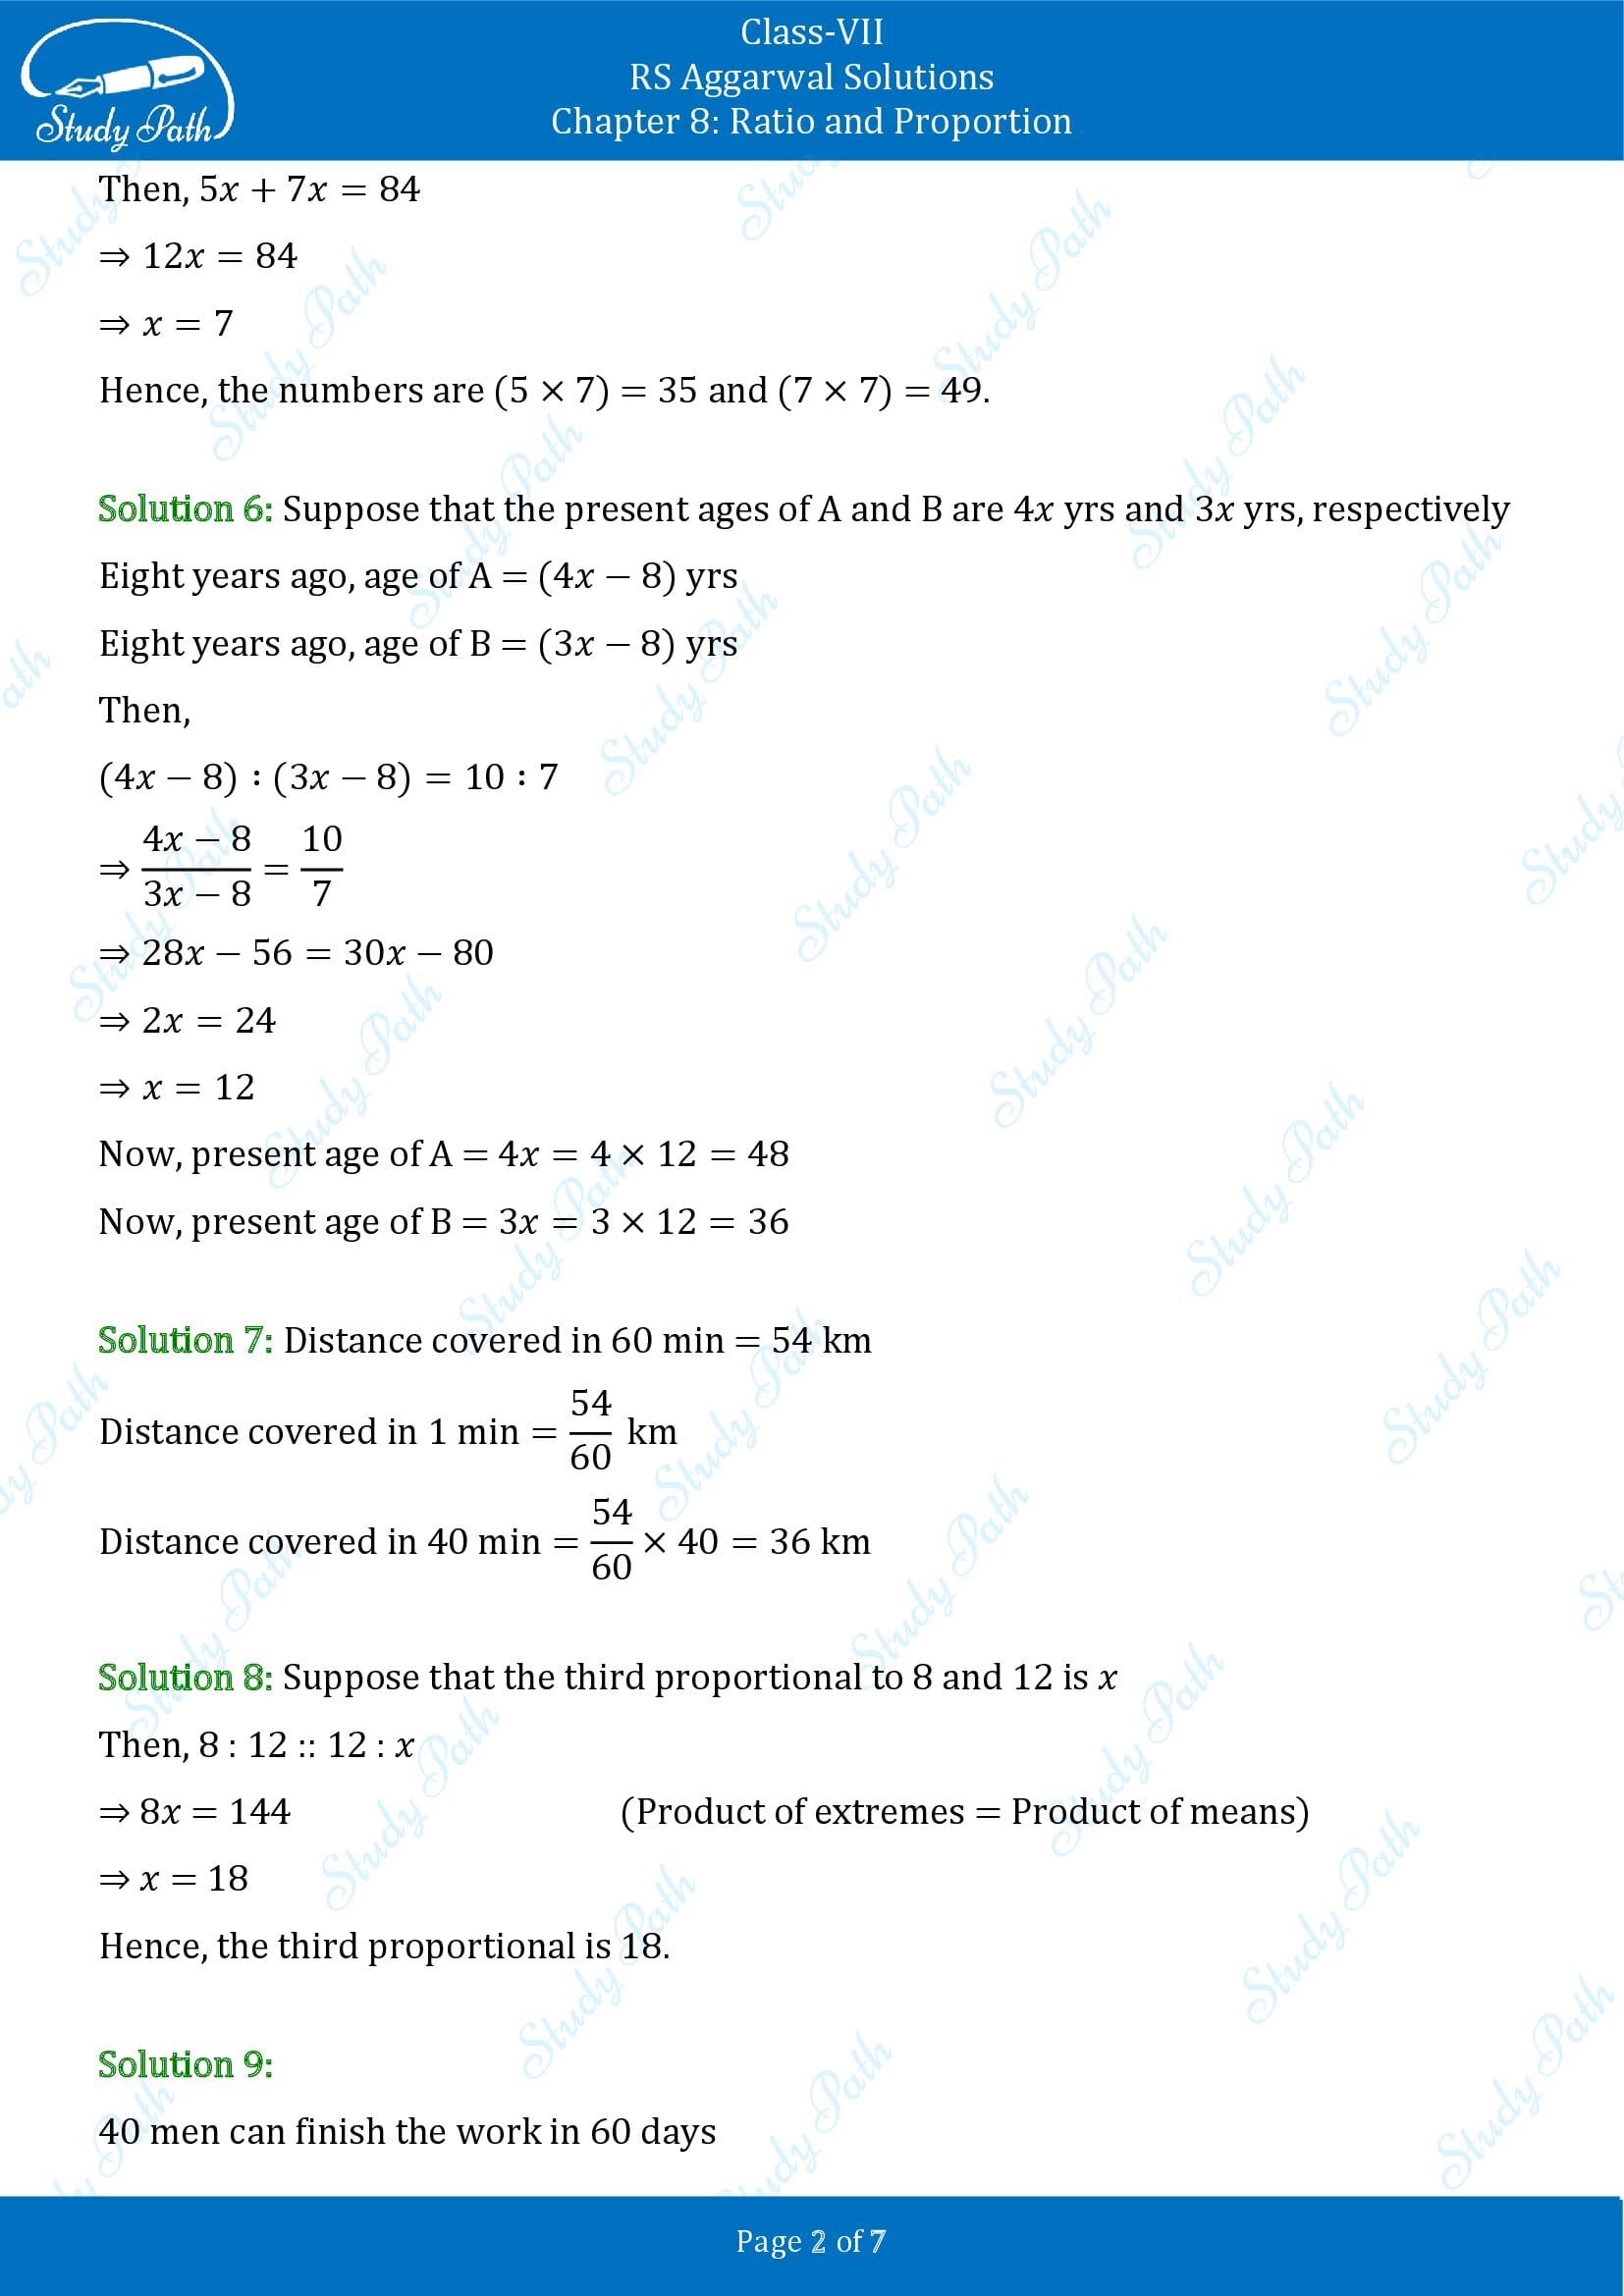 RS Aggarwal Solutions Class 7 Chapter 8 Ratio and Proportion Test Paper 00002